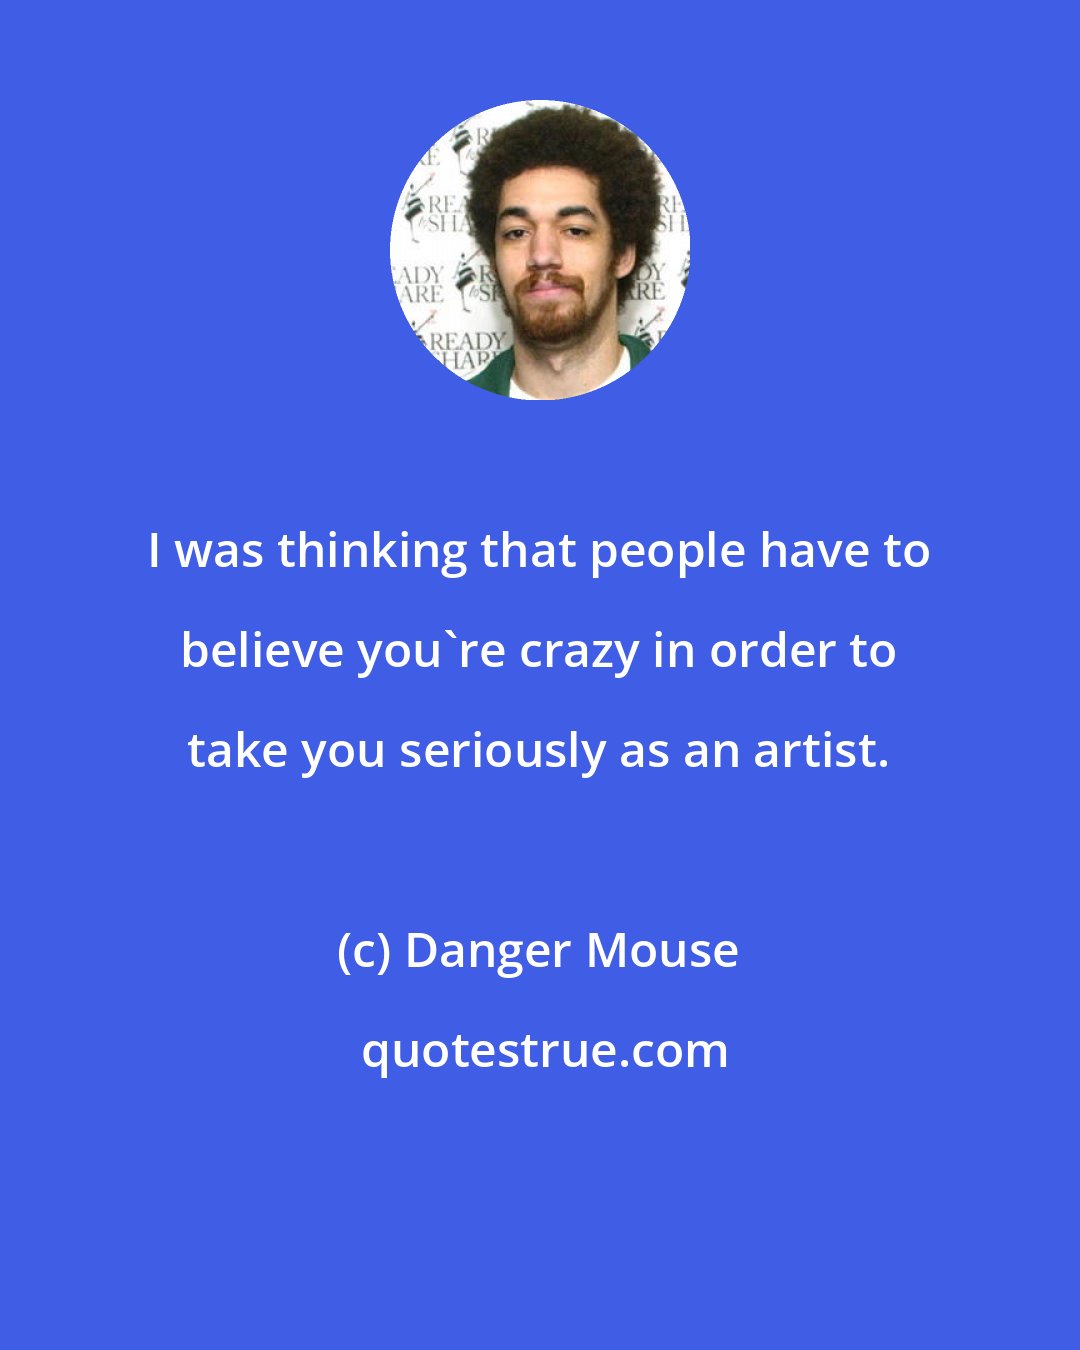 Danger Mouse: I was thinking that people have to believe you're crazy in order to take you seriously as an artist.